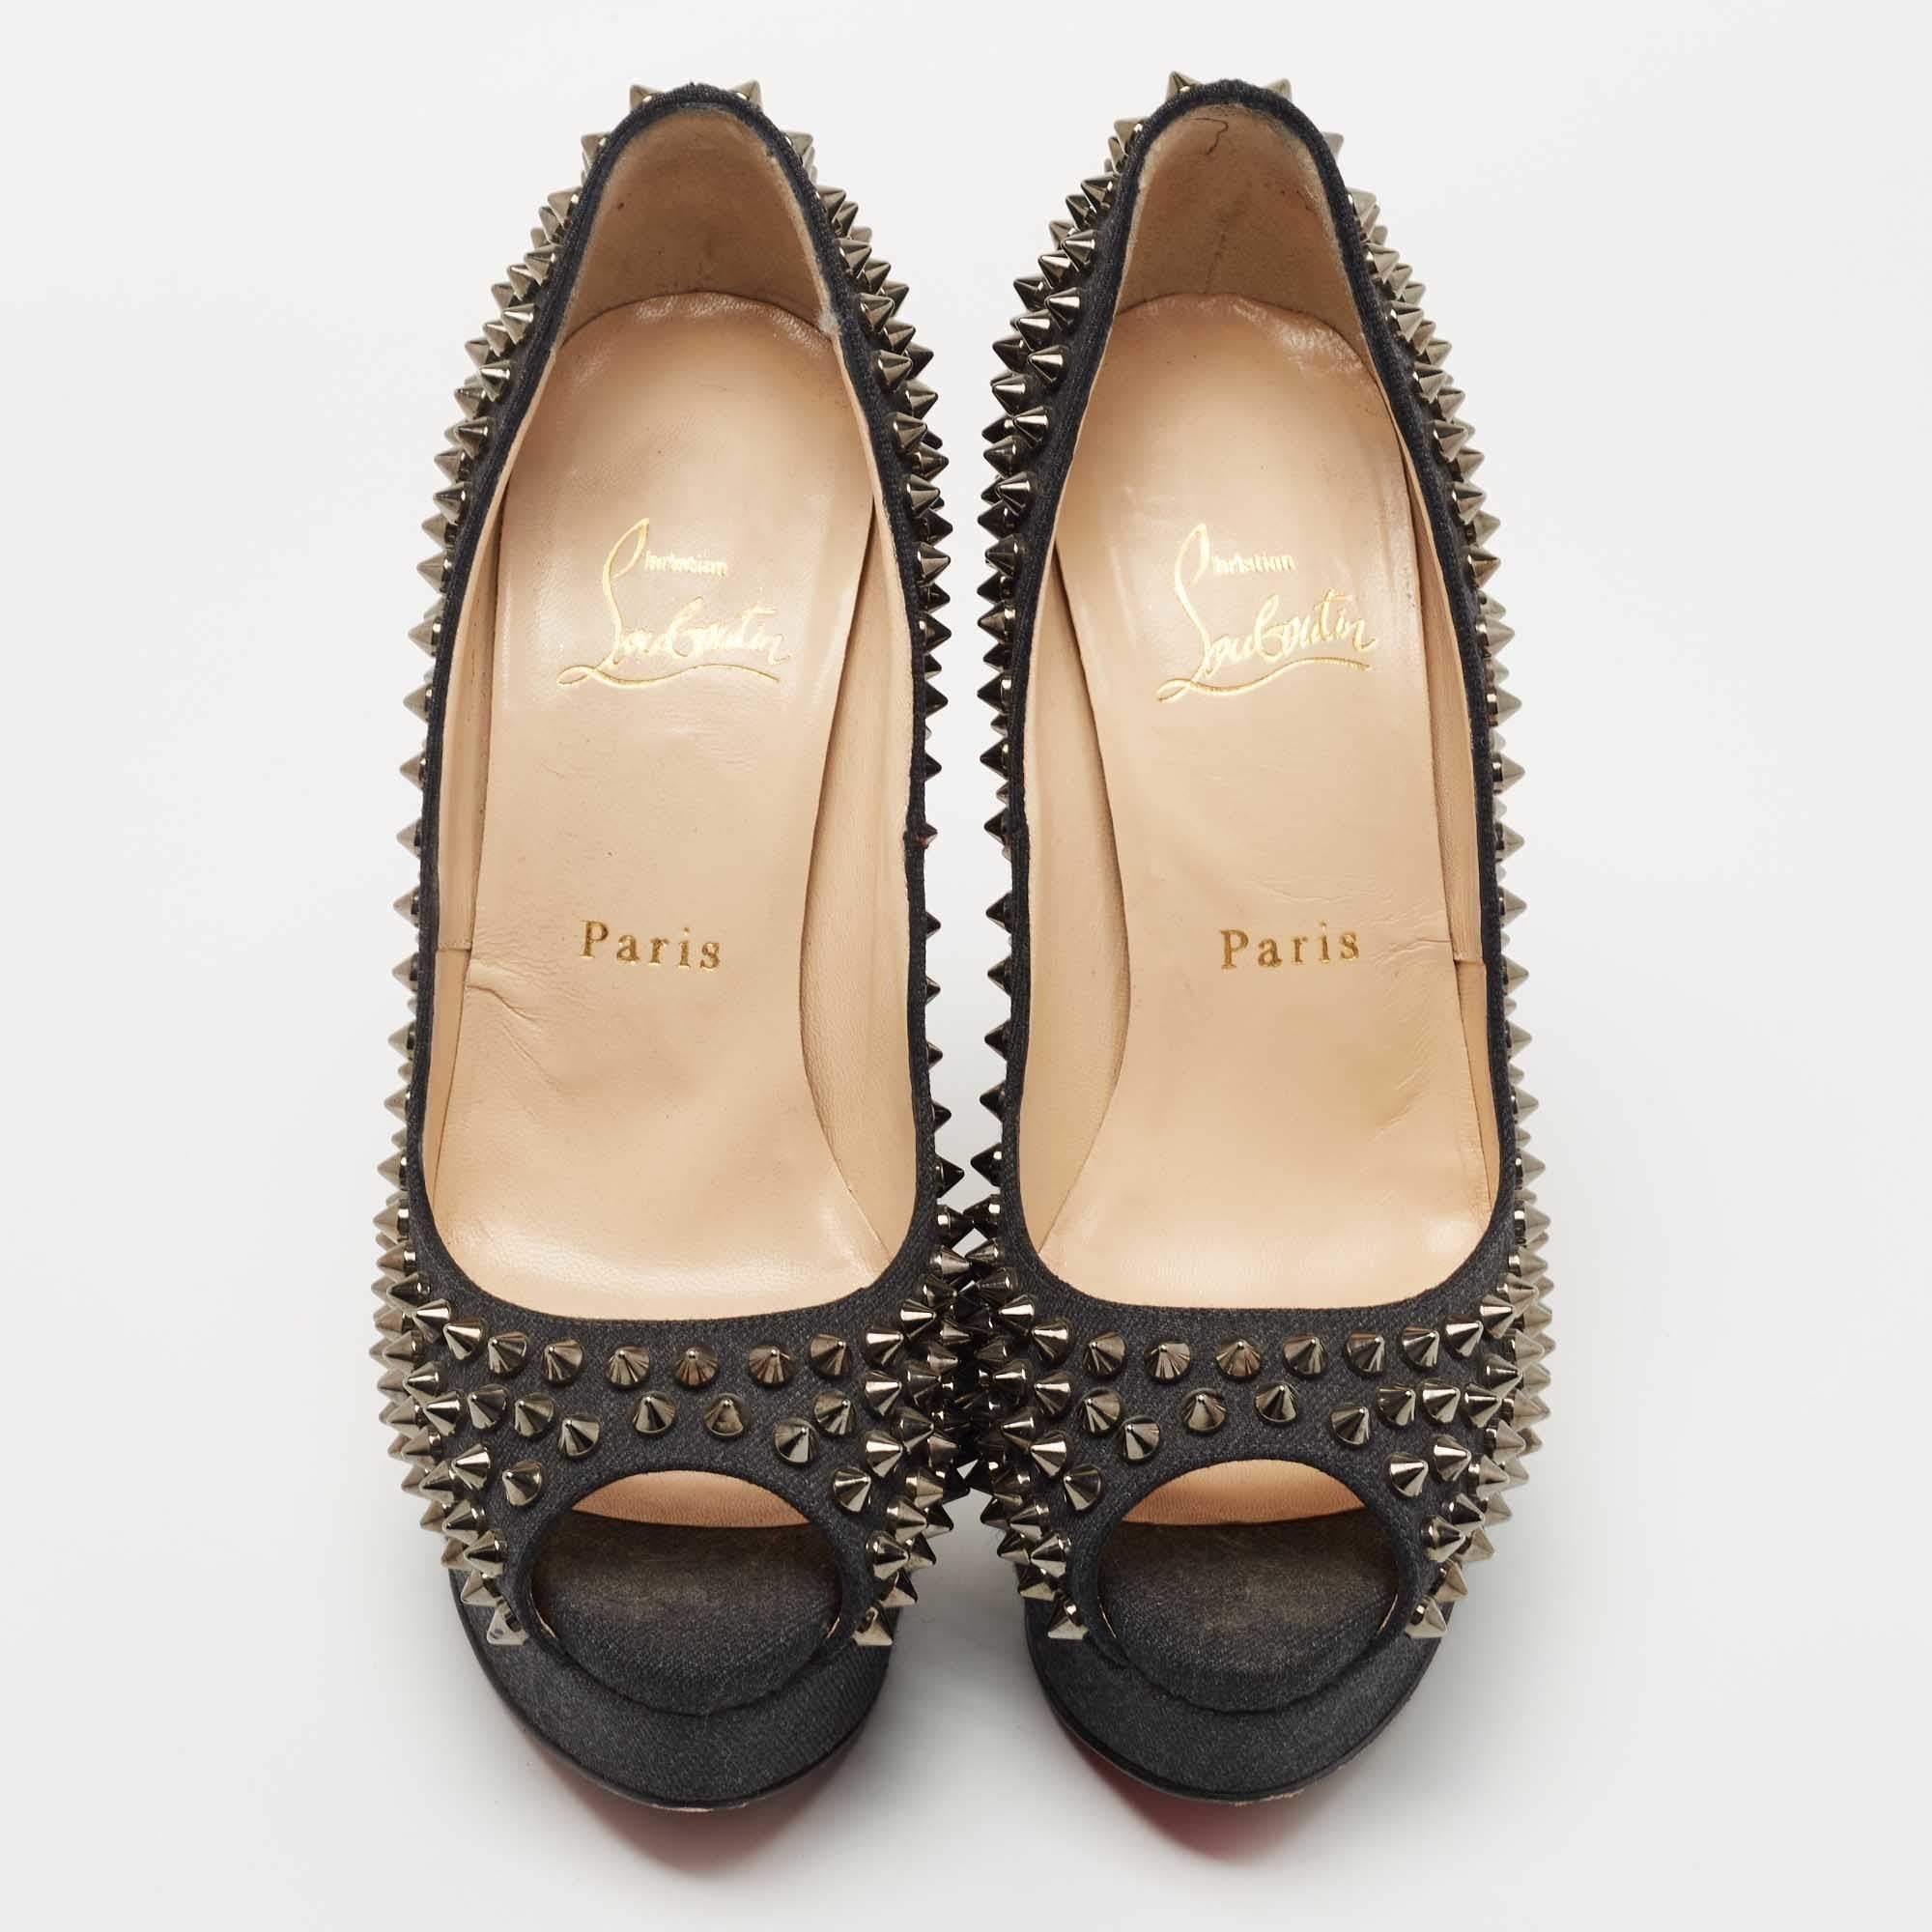 Stand out from the crowd with this pair of Christian Louboutin pumps that exude high fashion with class. Crafted from denim, this is a creation from their Lady Peep collection. It features a dark grey shade with peep toes and spikes on the exterior.